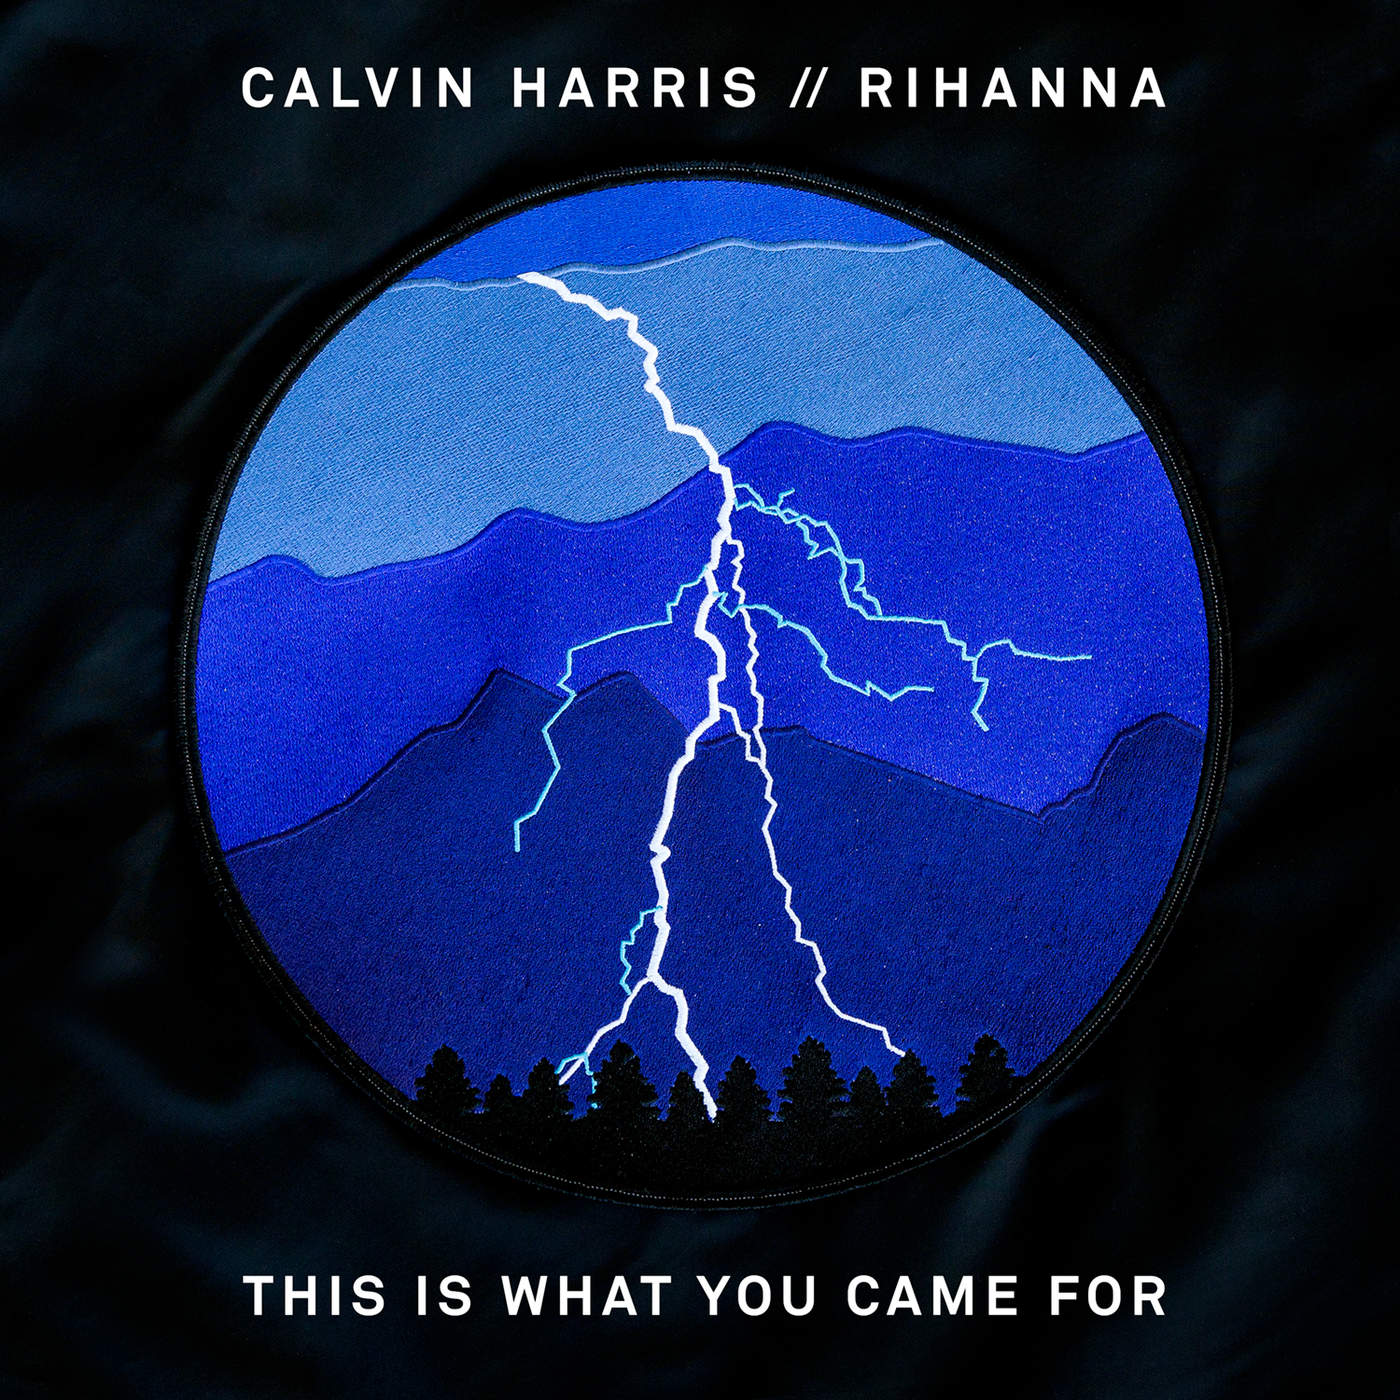 Art for This Is What You Came For (feat. Rihanna) by Calvin Harris